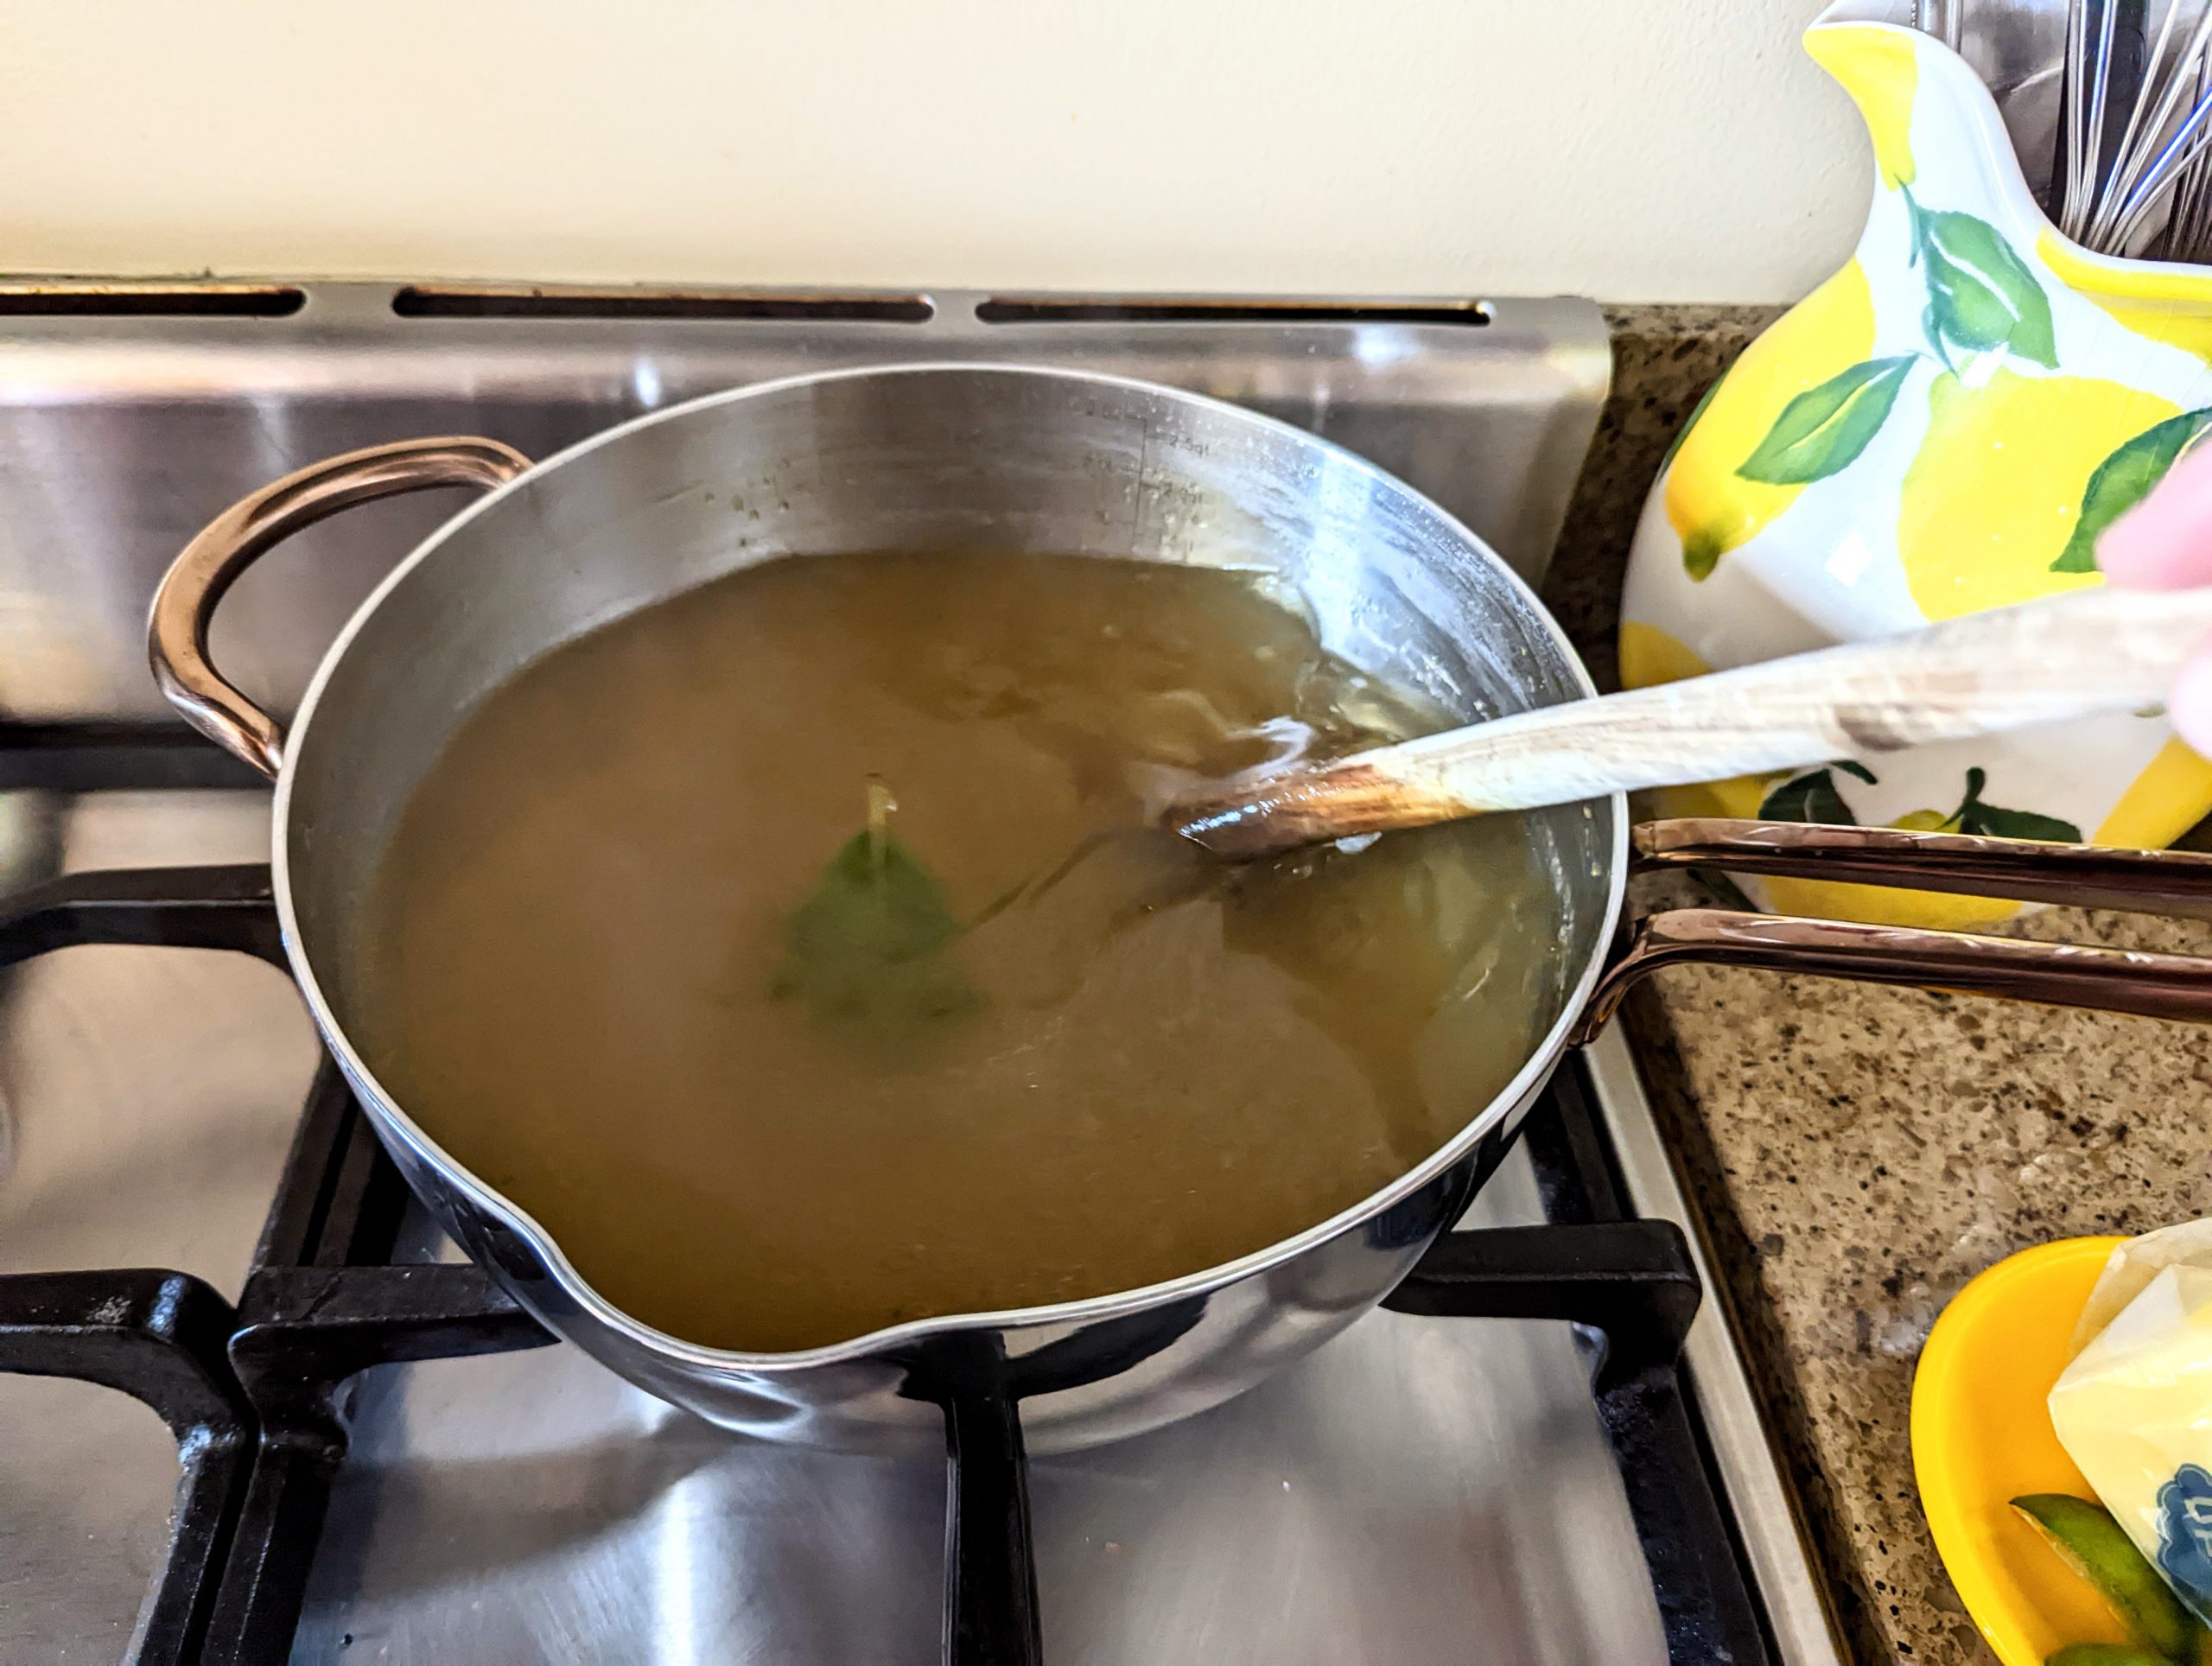 A saucepan of bay leaf infused chicken stock simmering away on the stove.